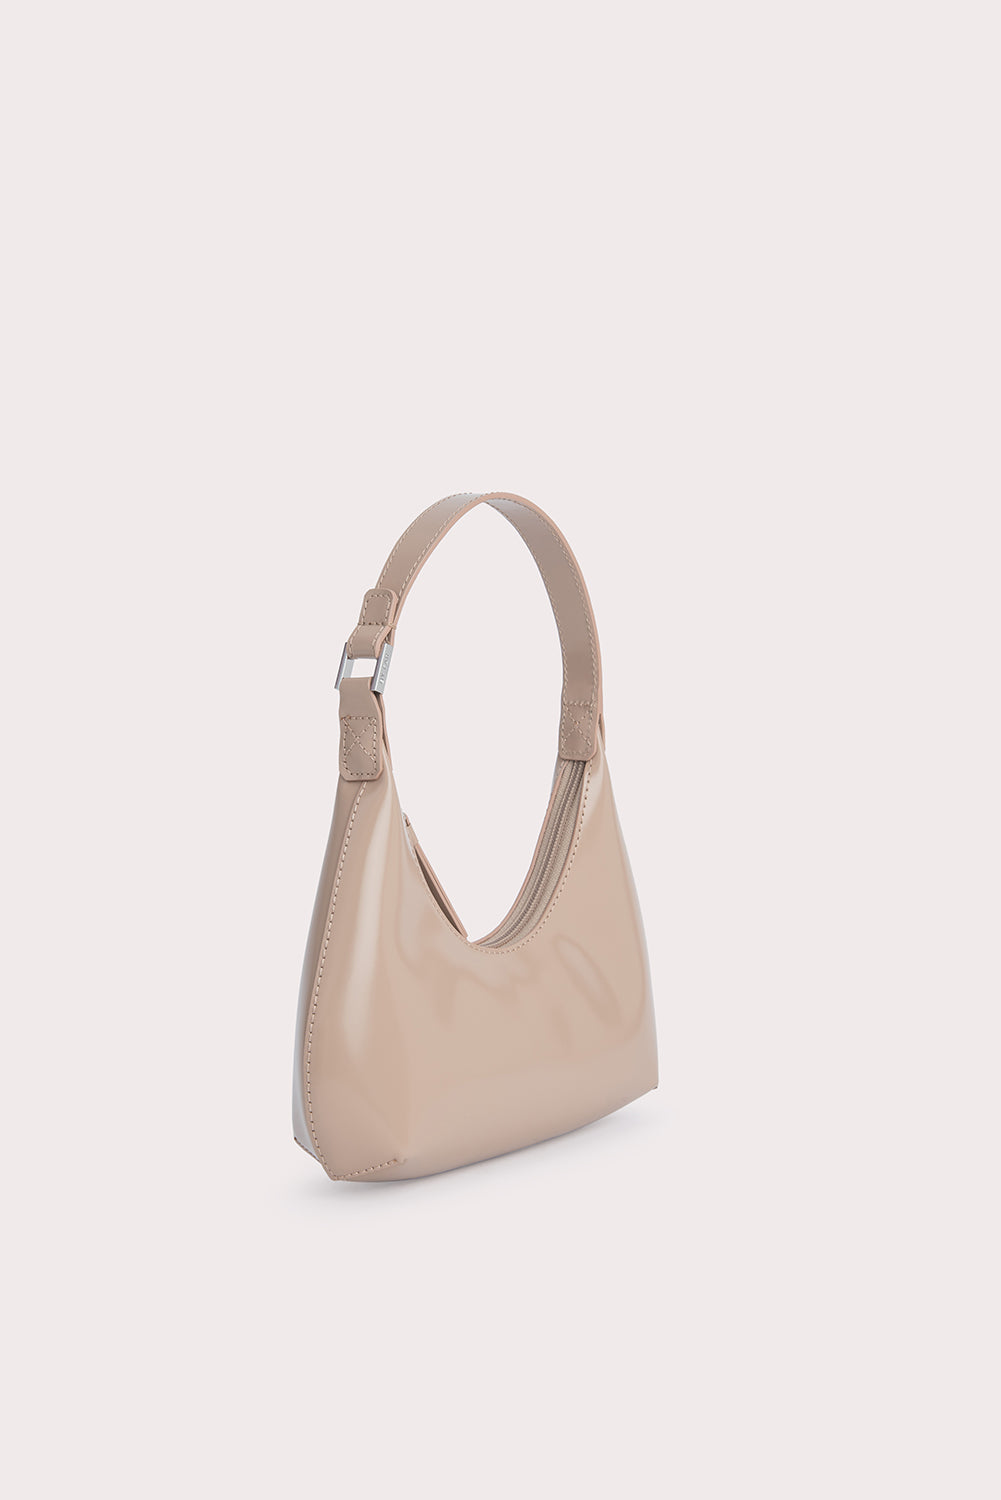 BY FAR Amber Bag in White